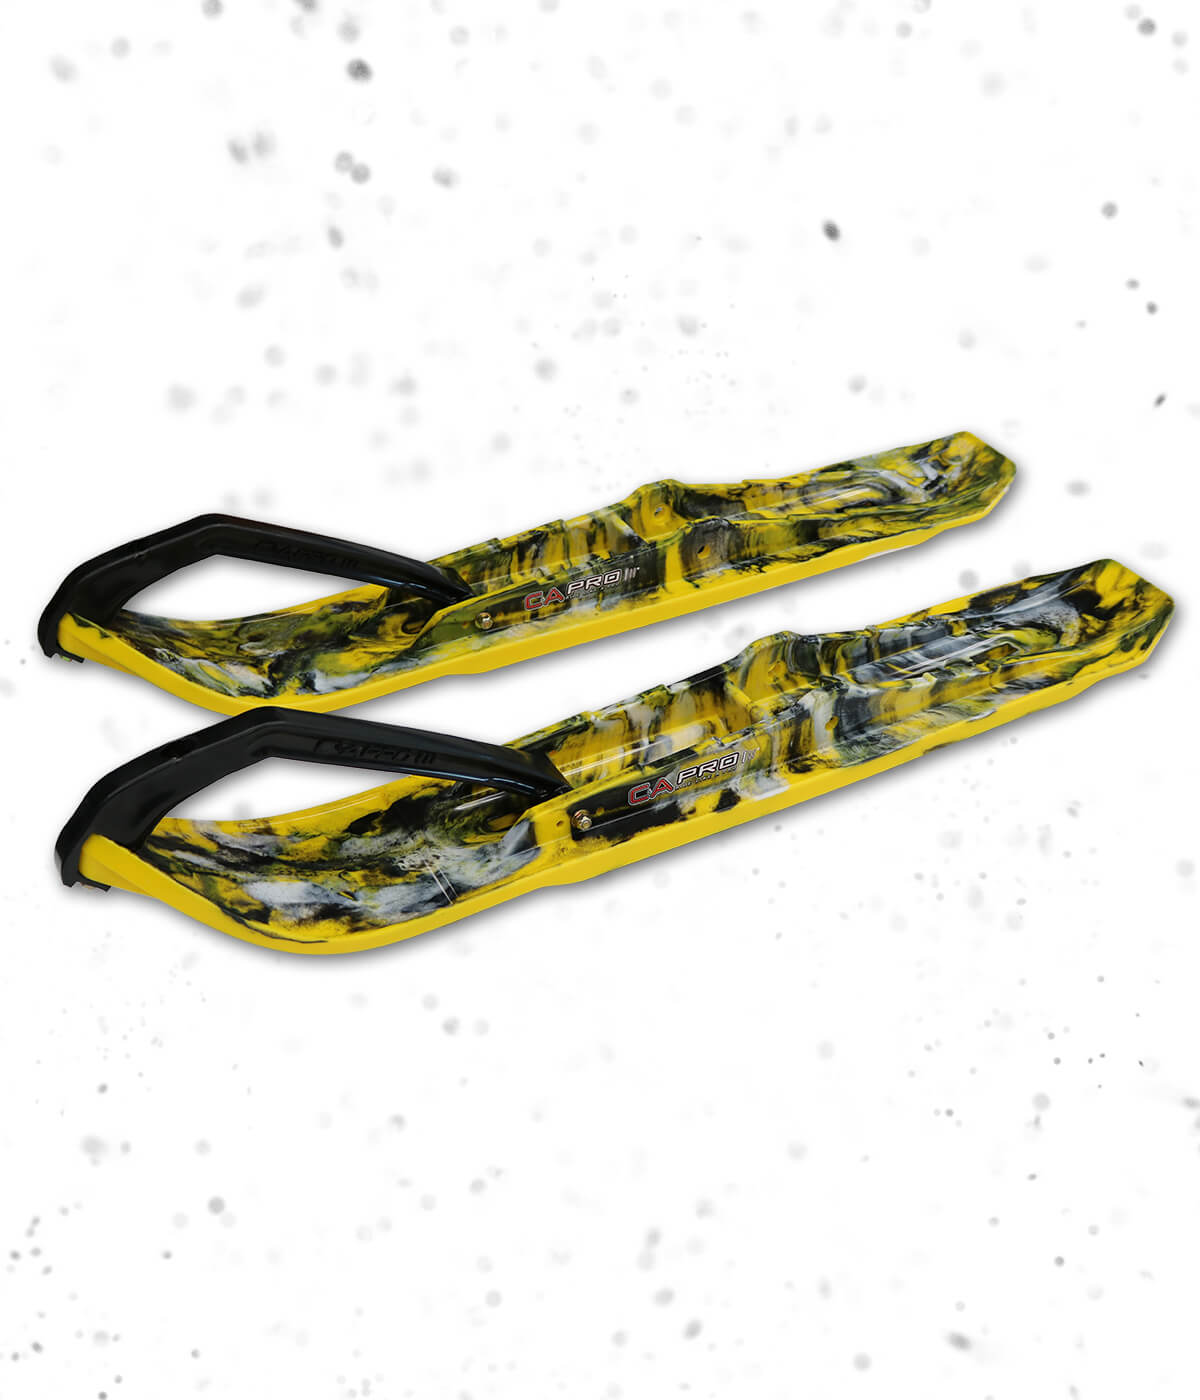 C&A Pro custom XPT trail skis with yellow base, black and white accents and black handles